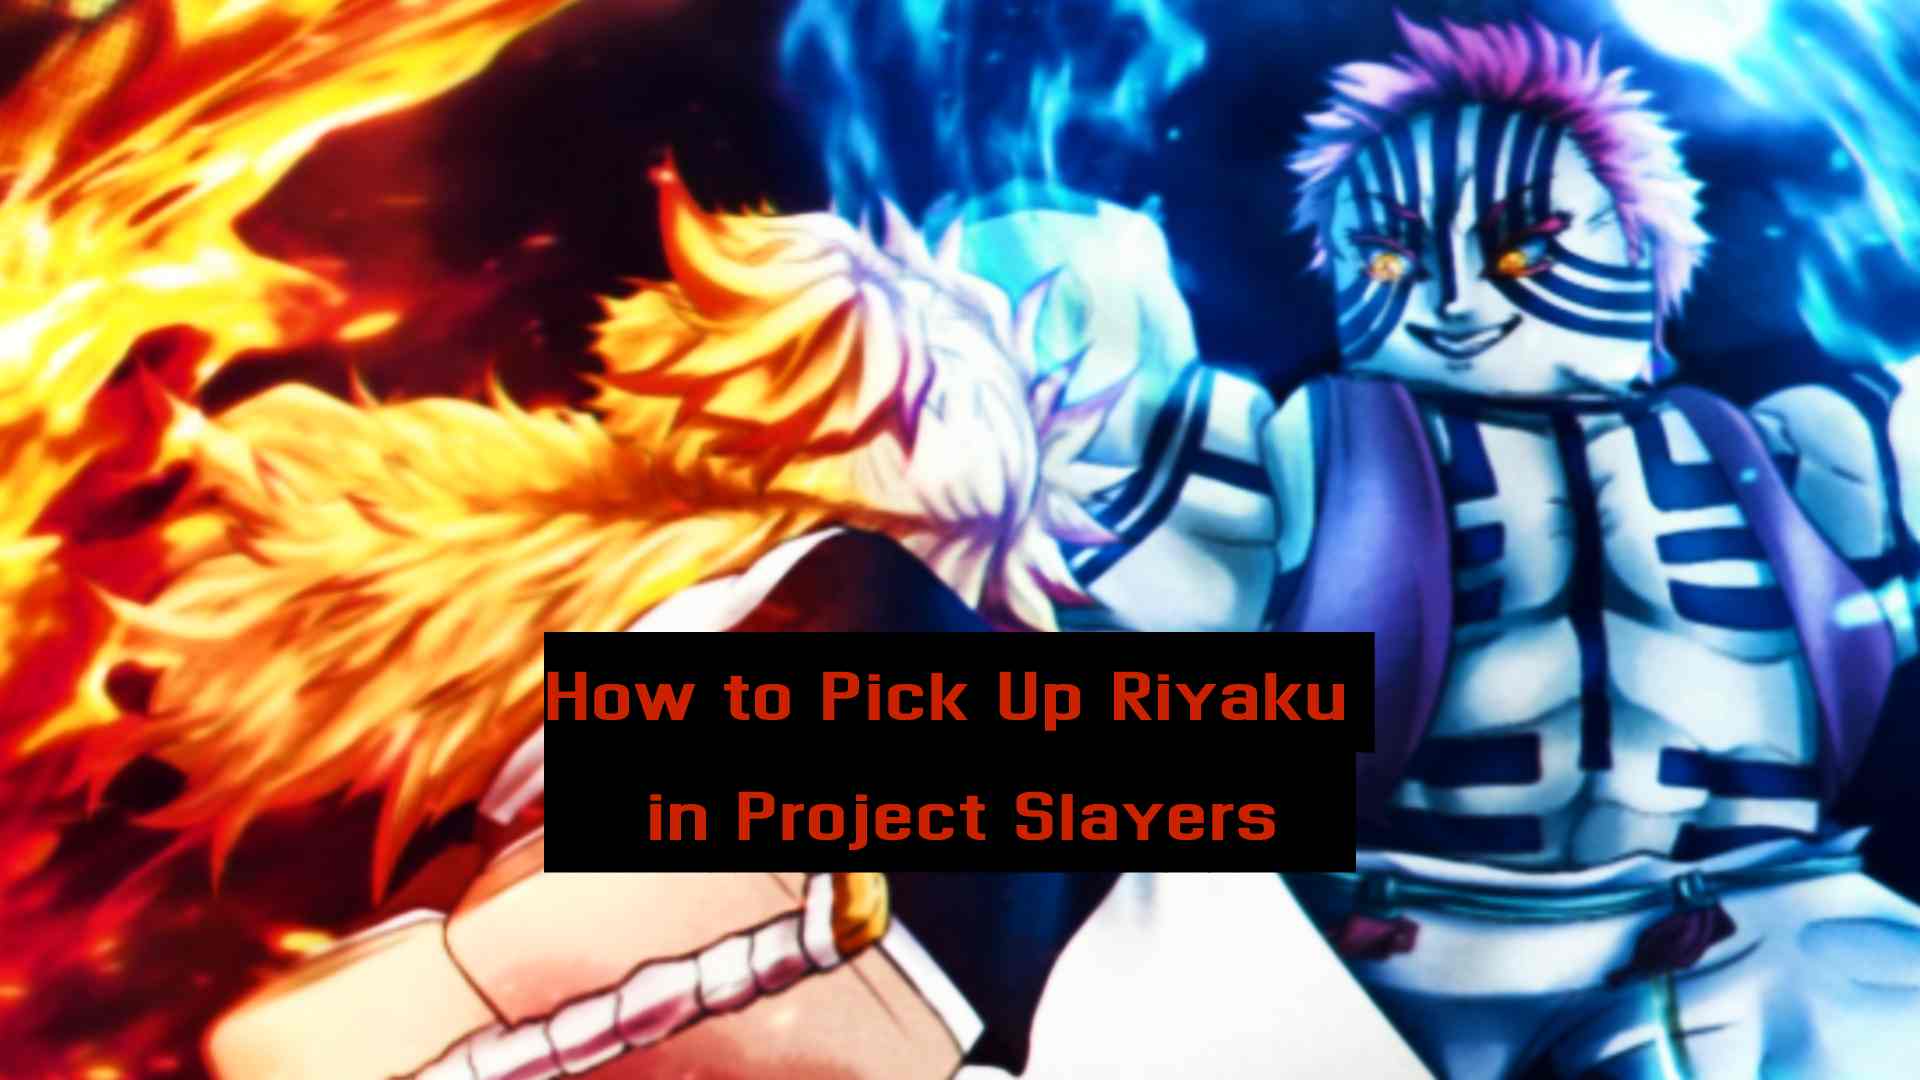 How to Pick Up Riyaku in Project Slayers